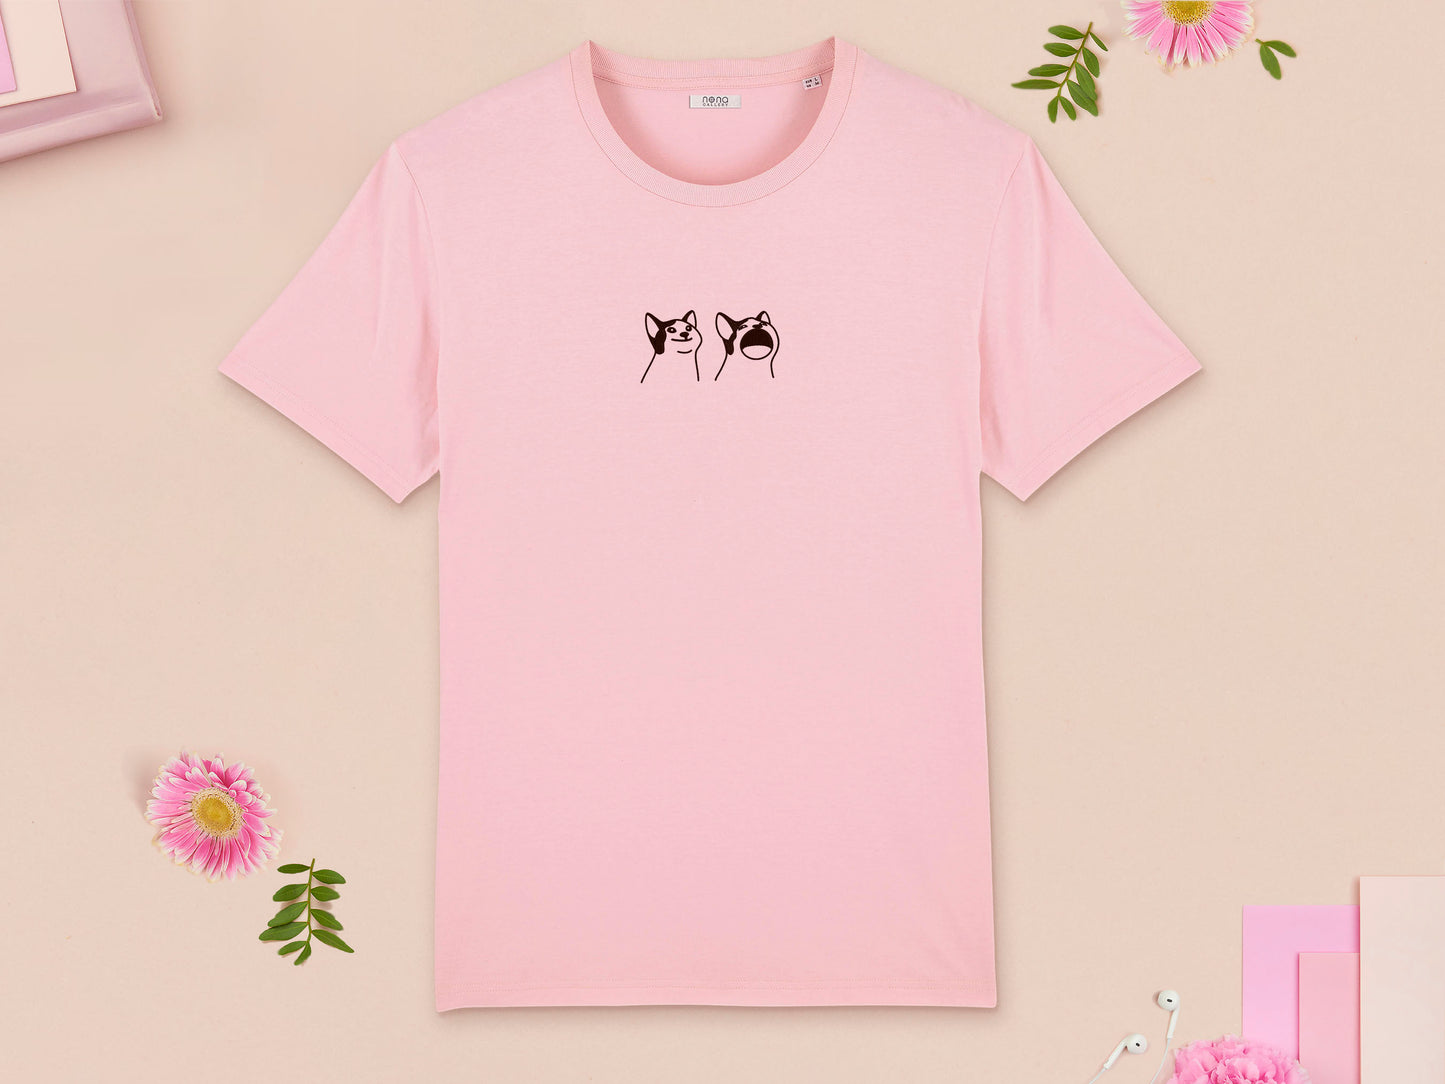 A pink crew neck short sleeve t-shirt, with an embroidered brown thread design of a cute popcat the cat meme reaction twitch emote